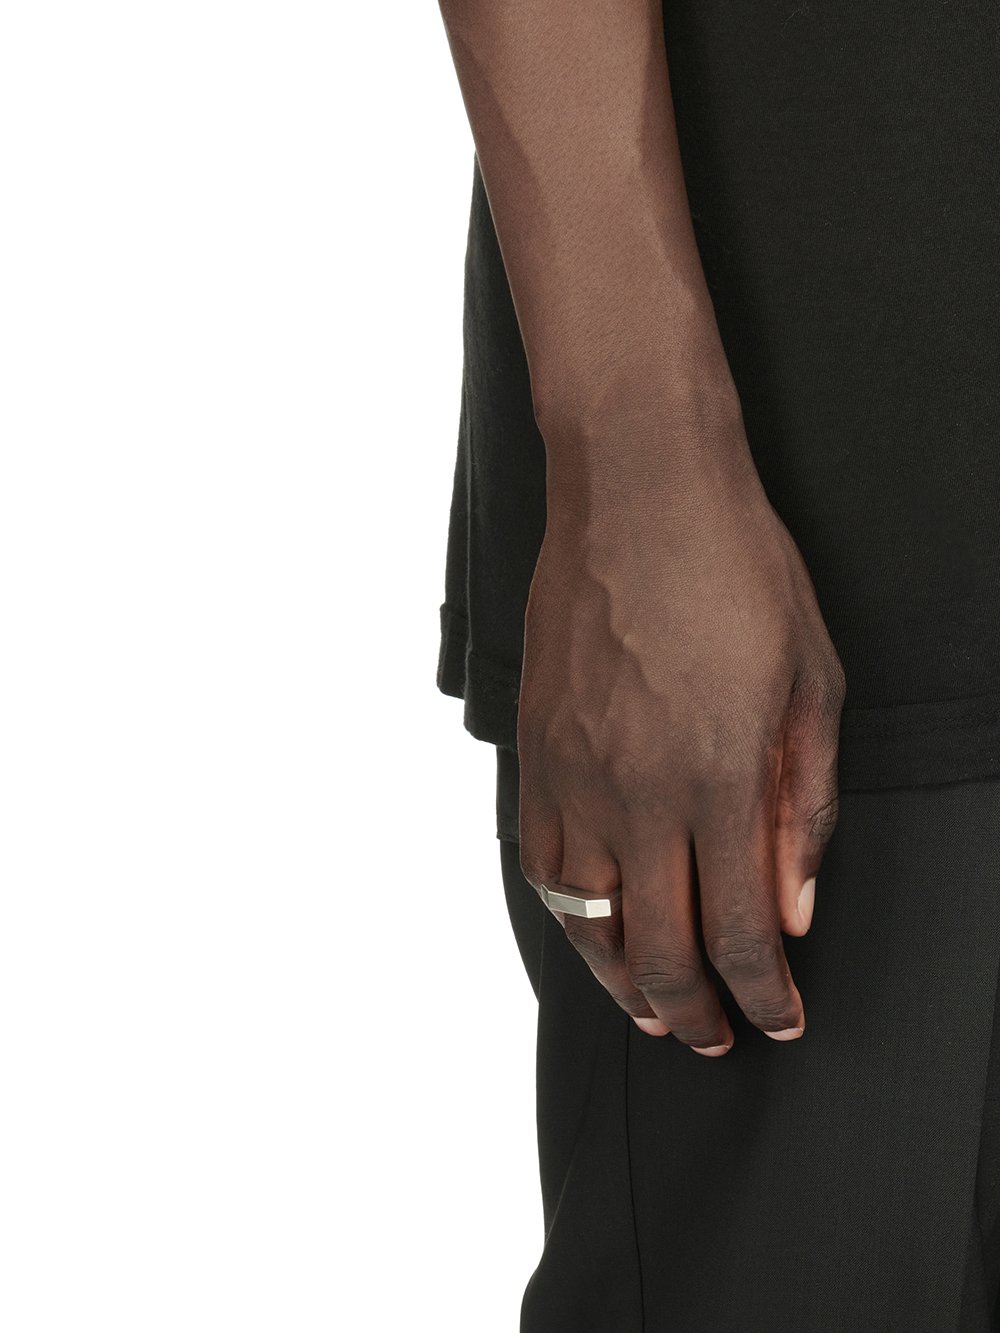 RICK OWENS BEVELED RING IN SILVER